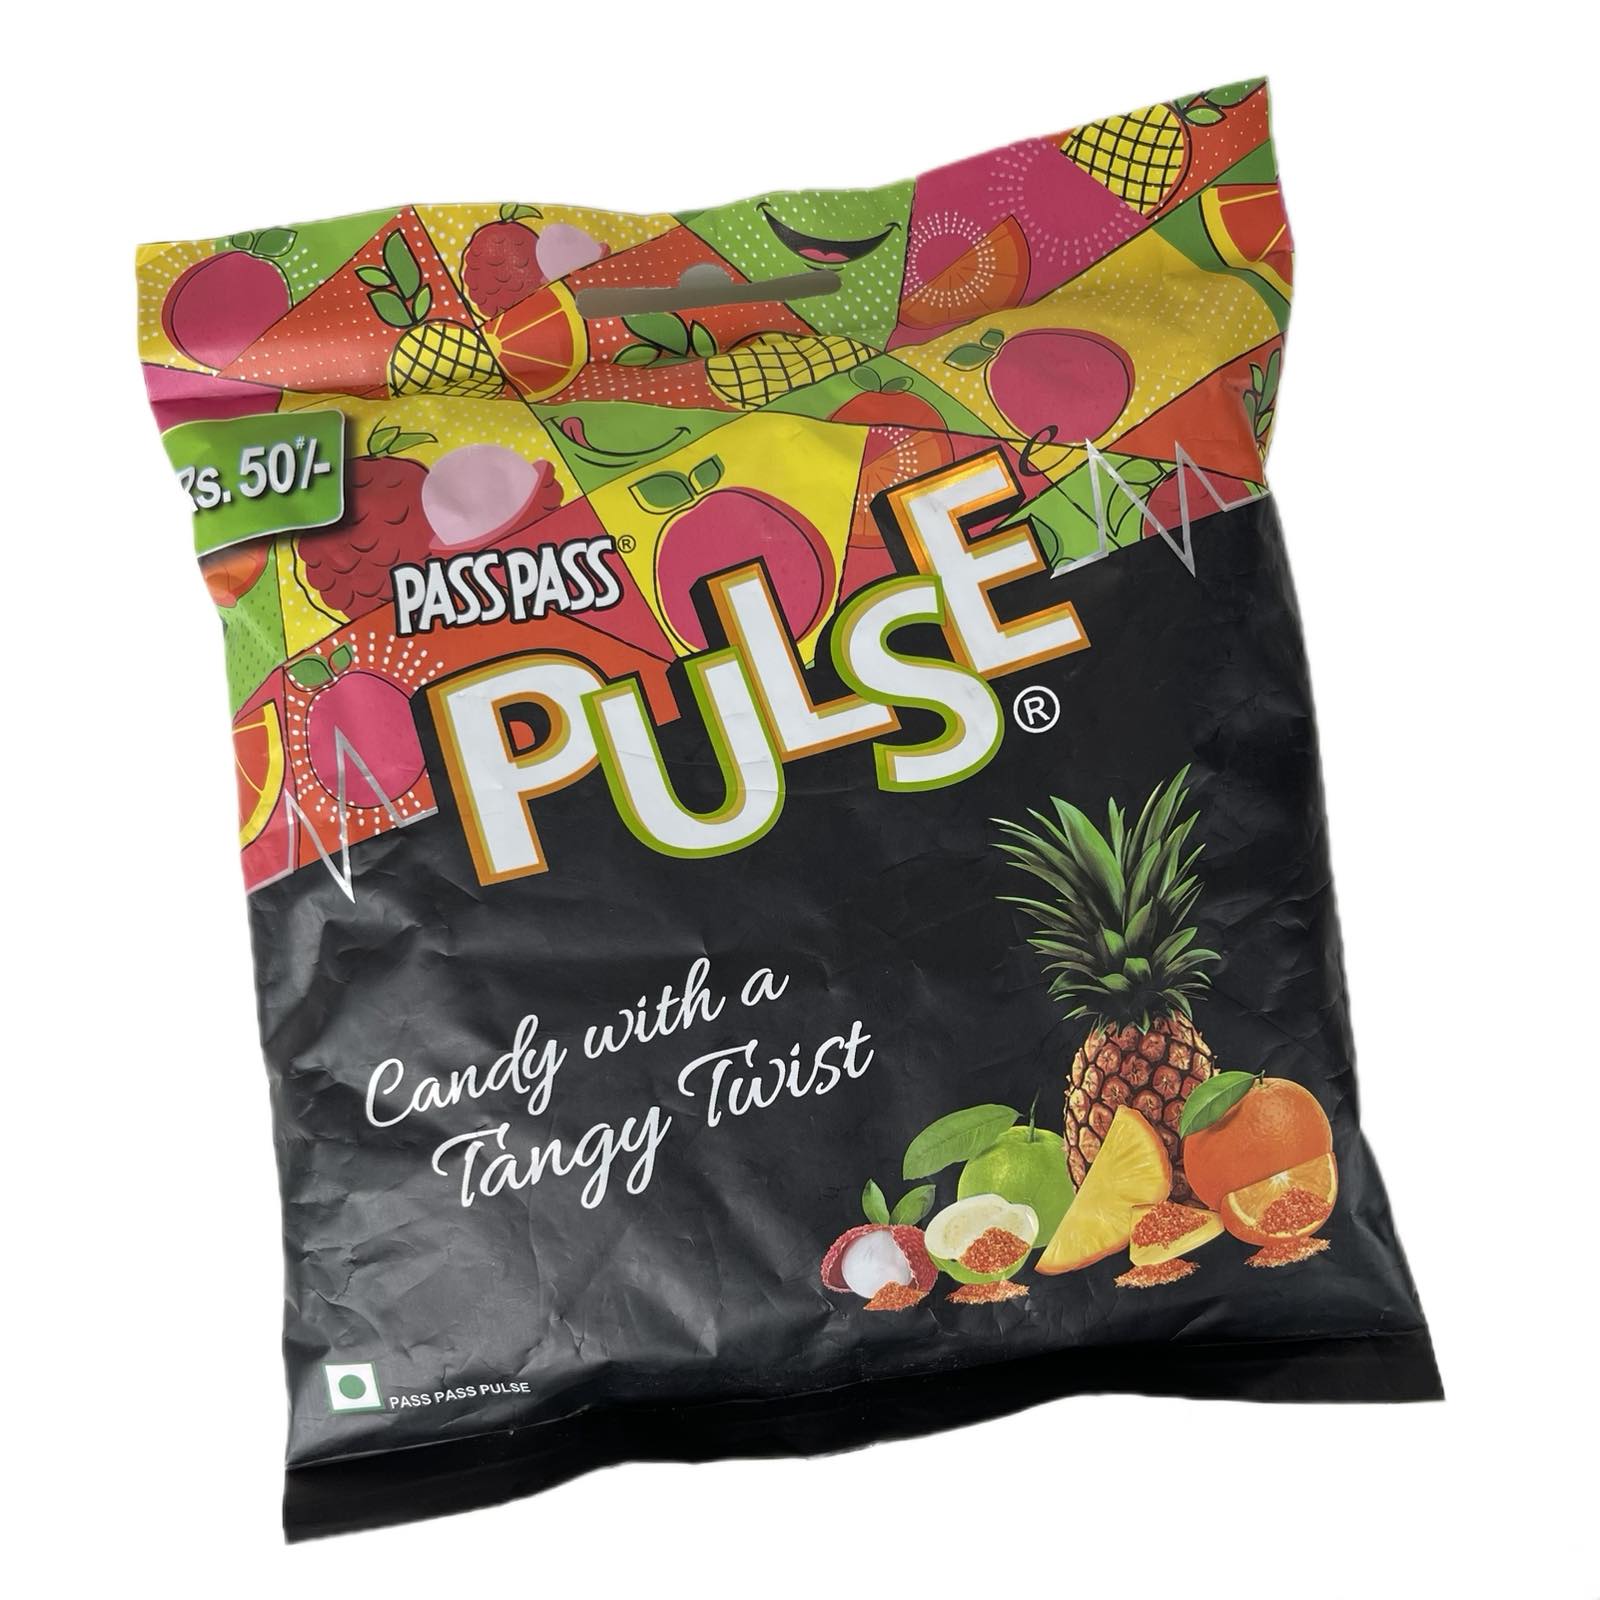 Assorted Flavours PULSE Candy with Tangy Twist (Леденцы ПУЛЬС АССОРТИ Вкусов), уп. 50 шт. (190 г.)